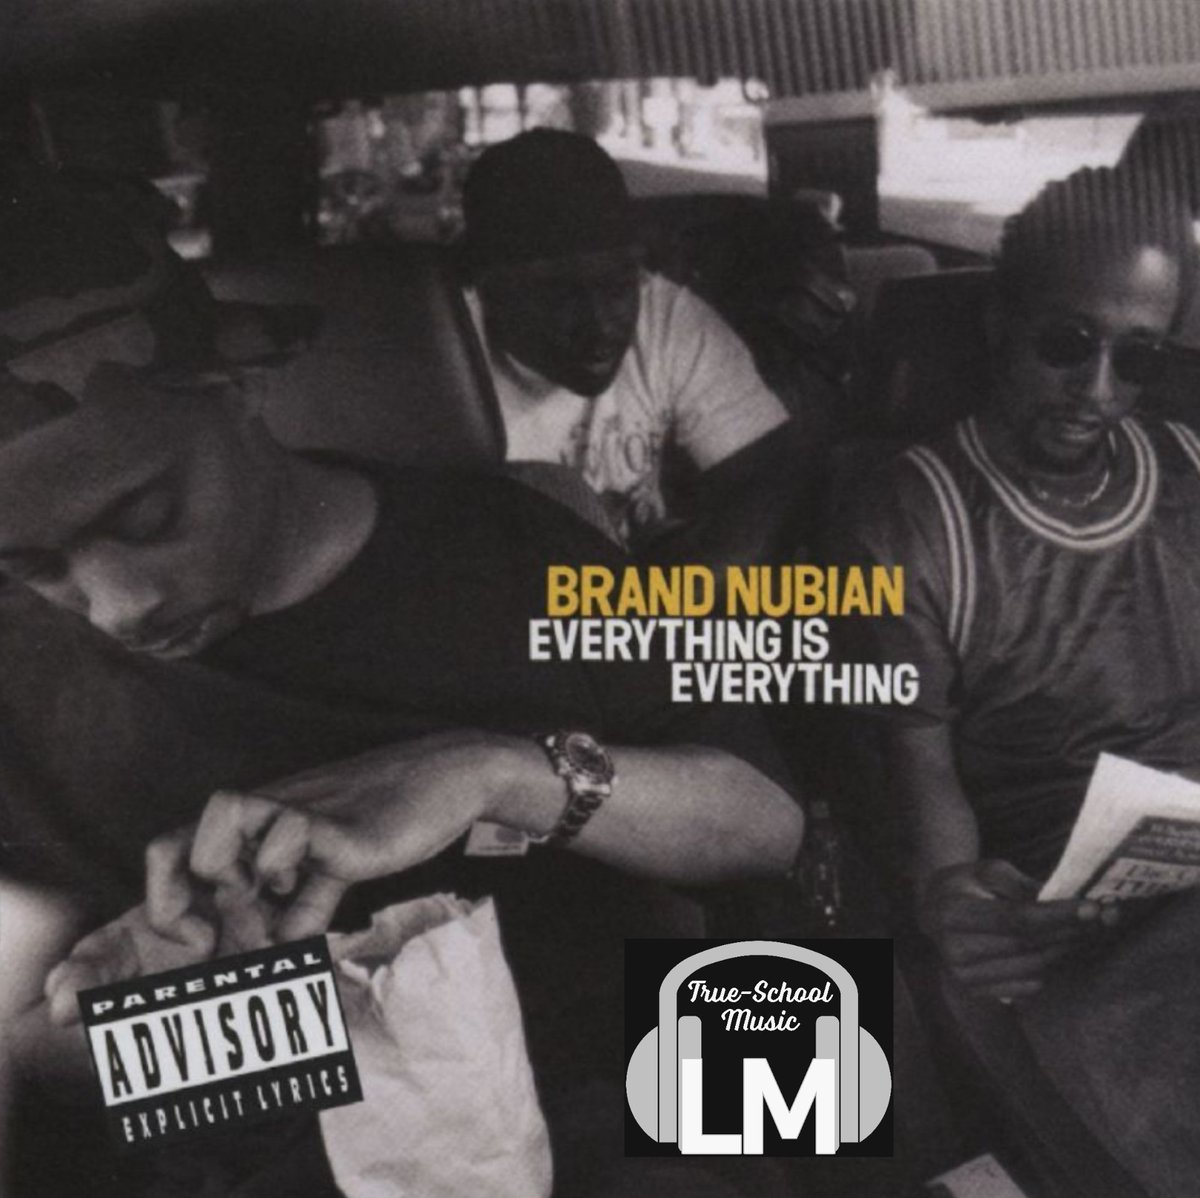 Also released on this date Nov 1st 1994 Brand Nubian released their third album Everything is Everything 🎶🎵🎧
#BrandNubian #everythingiseverything #hiphop #trueschoolhiphop #hiphophistory